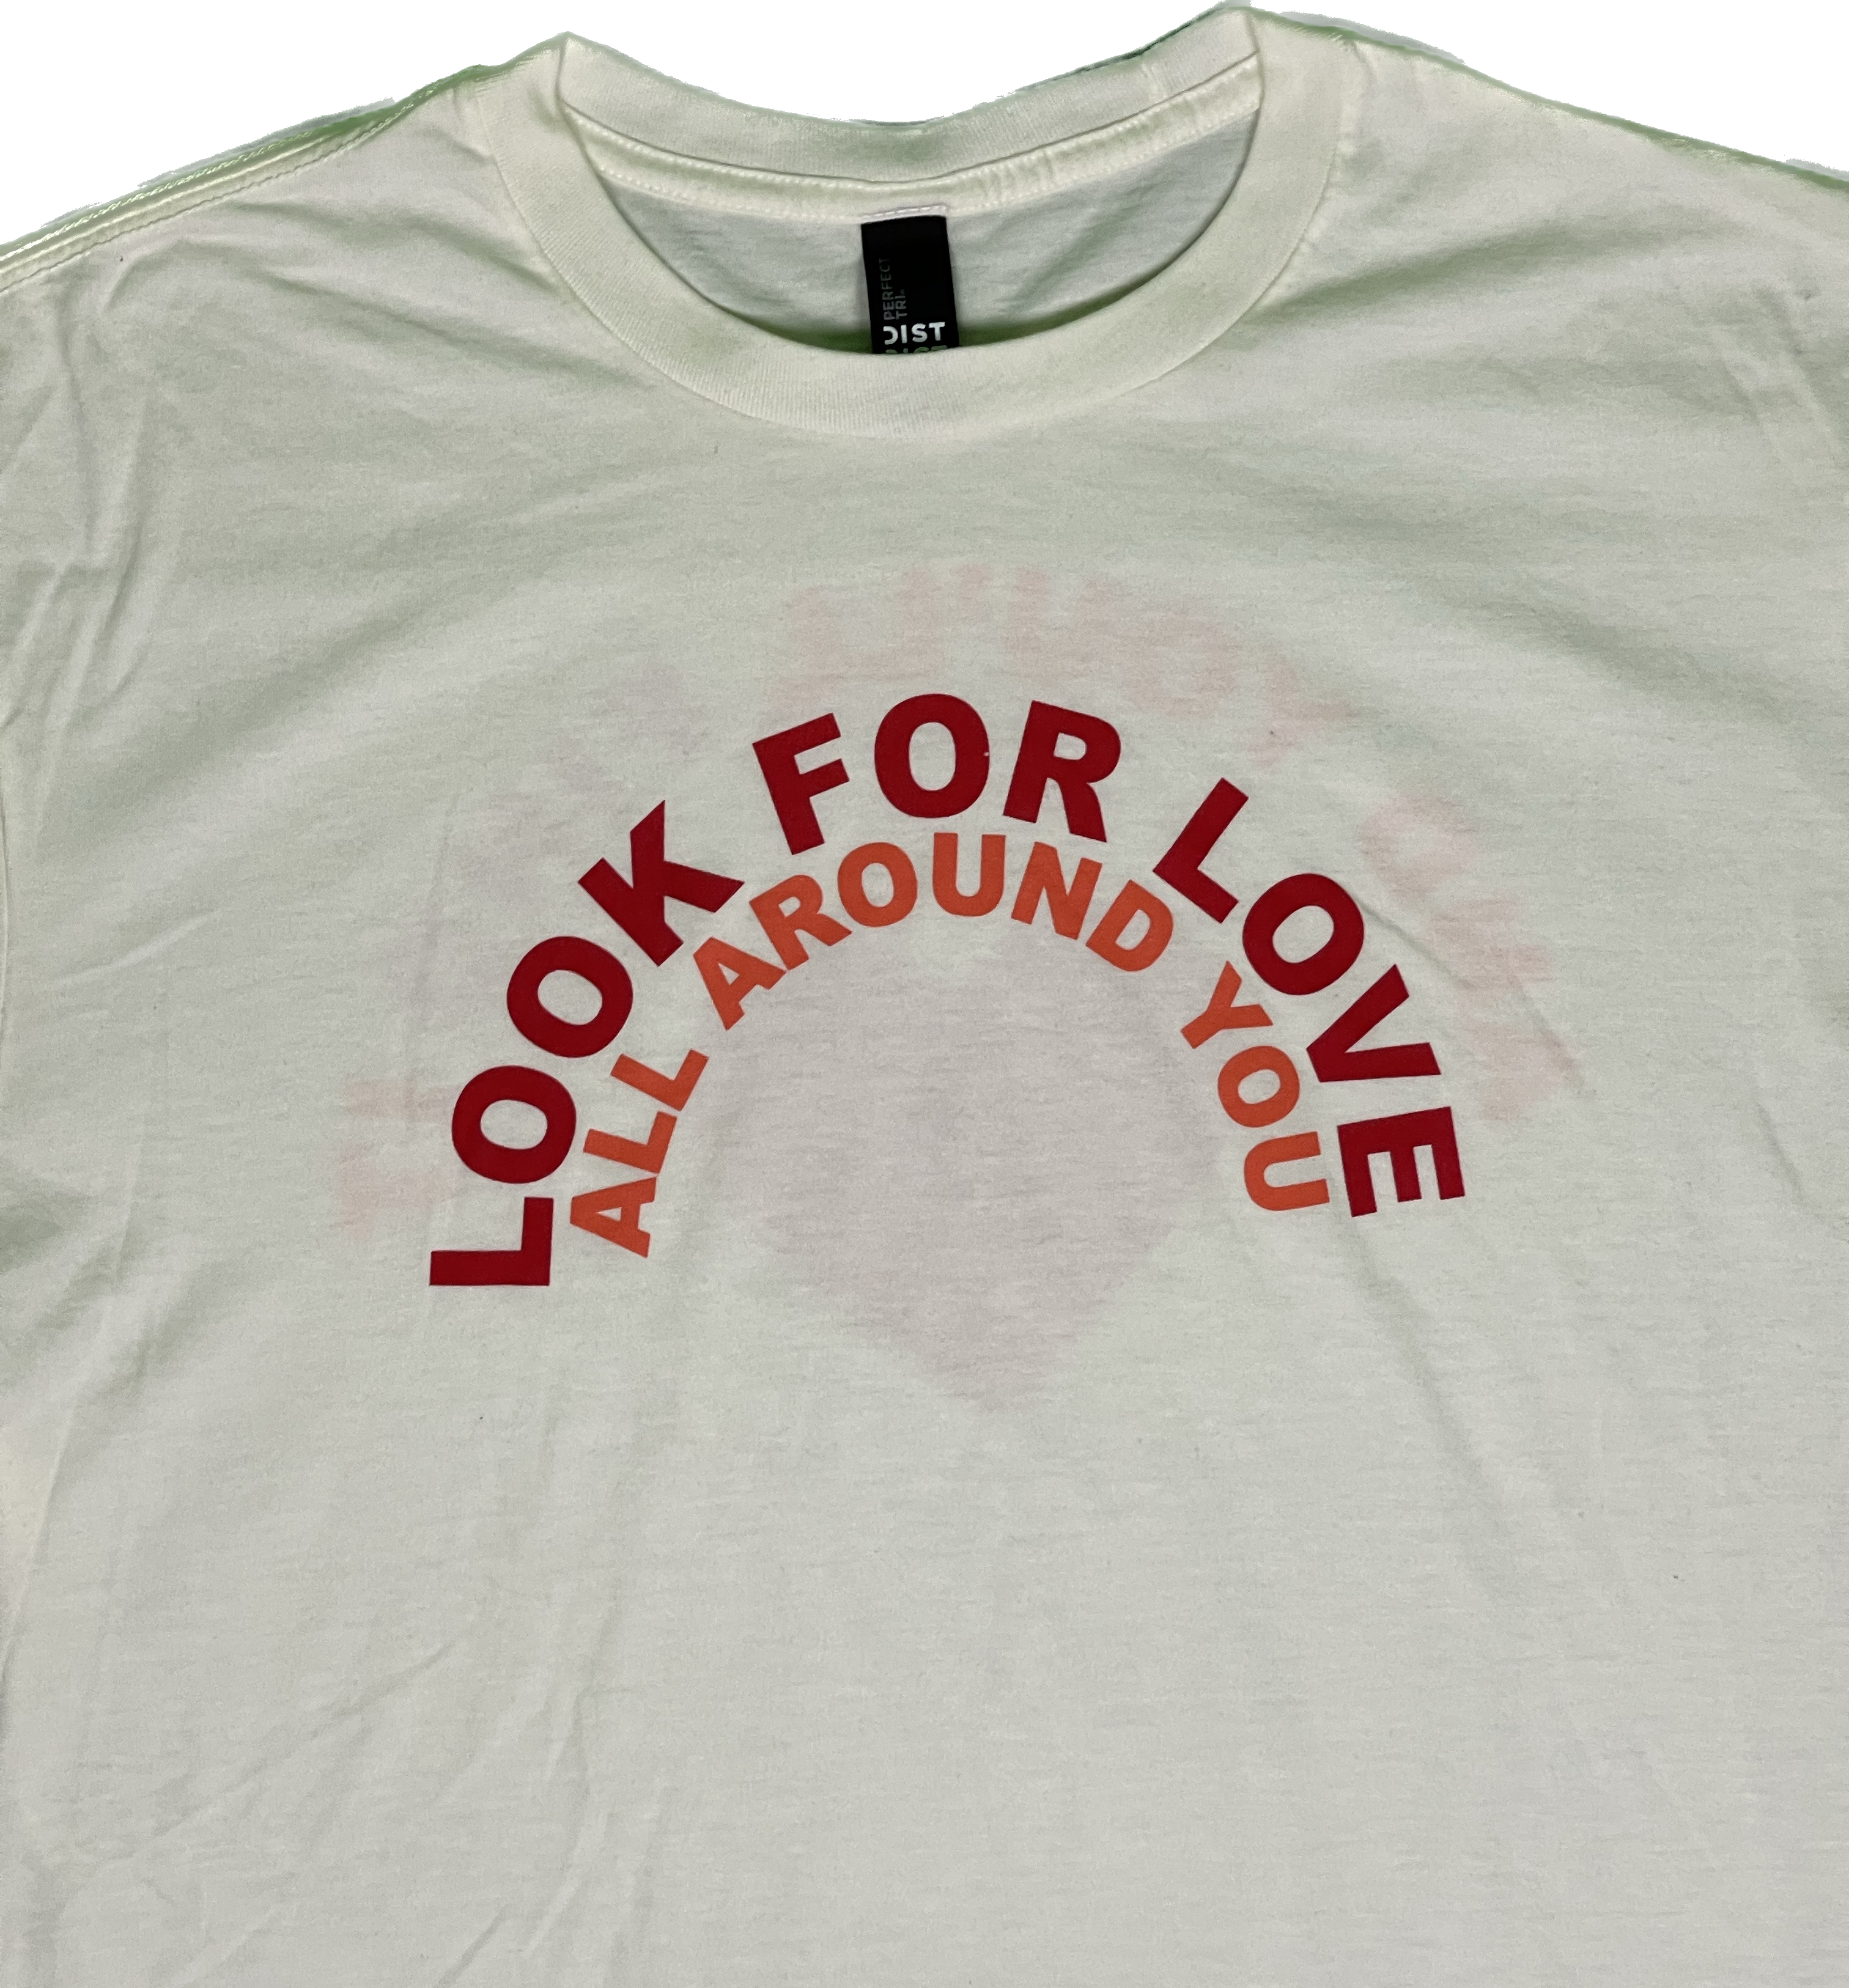 Look for Love Shirt